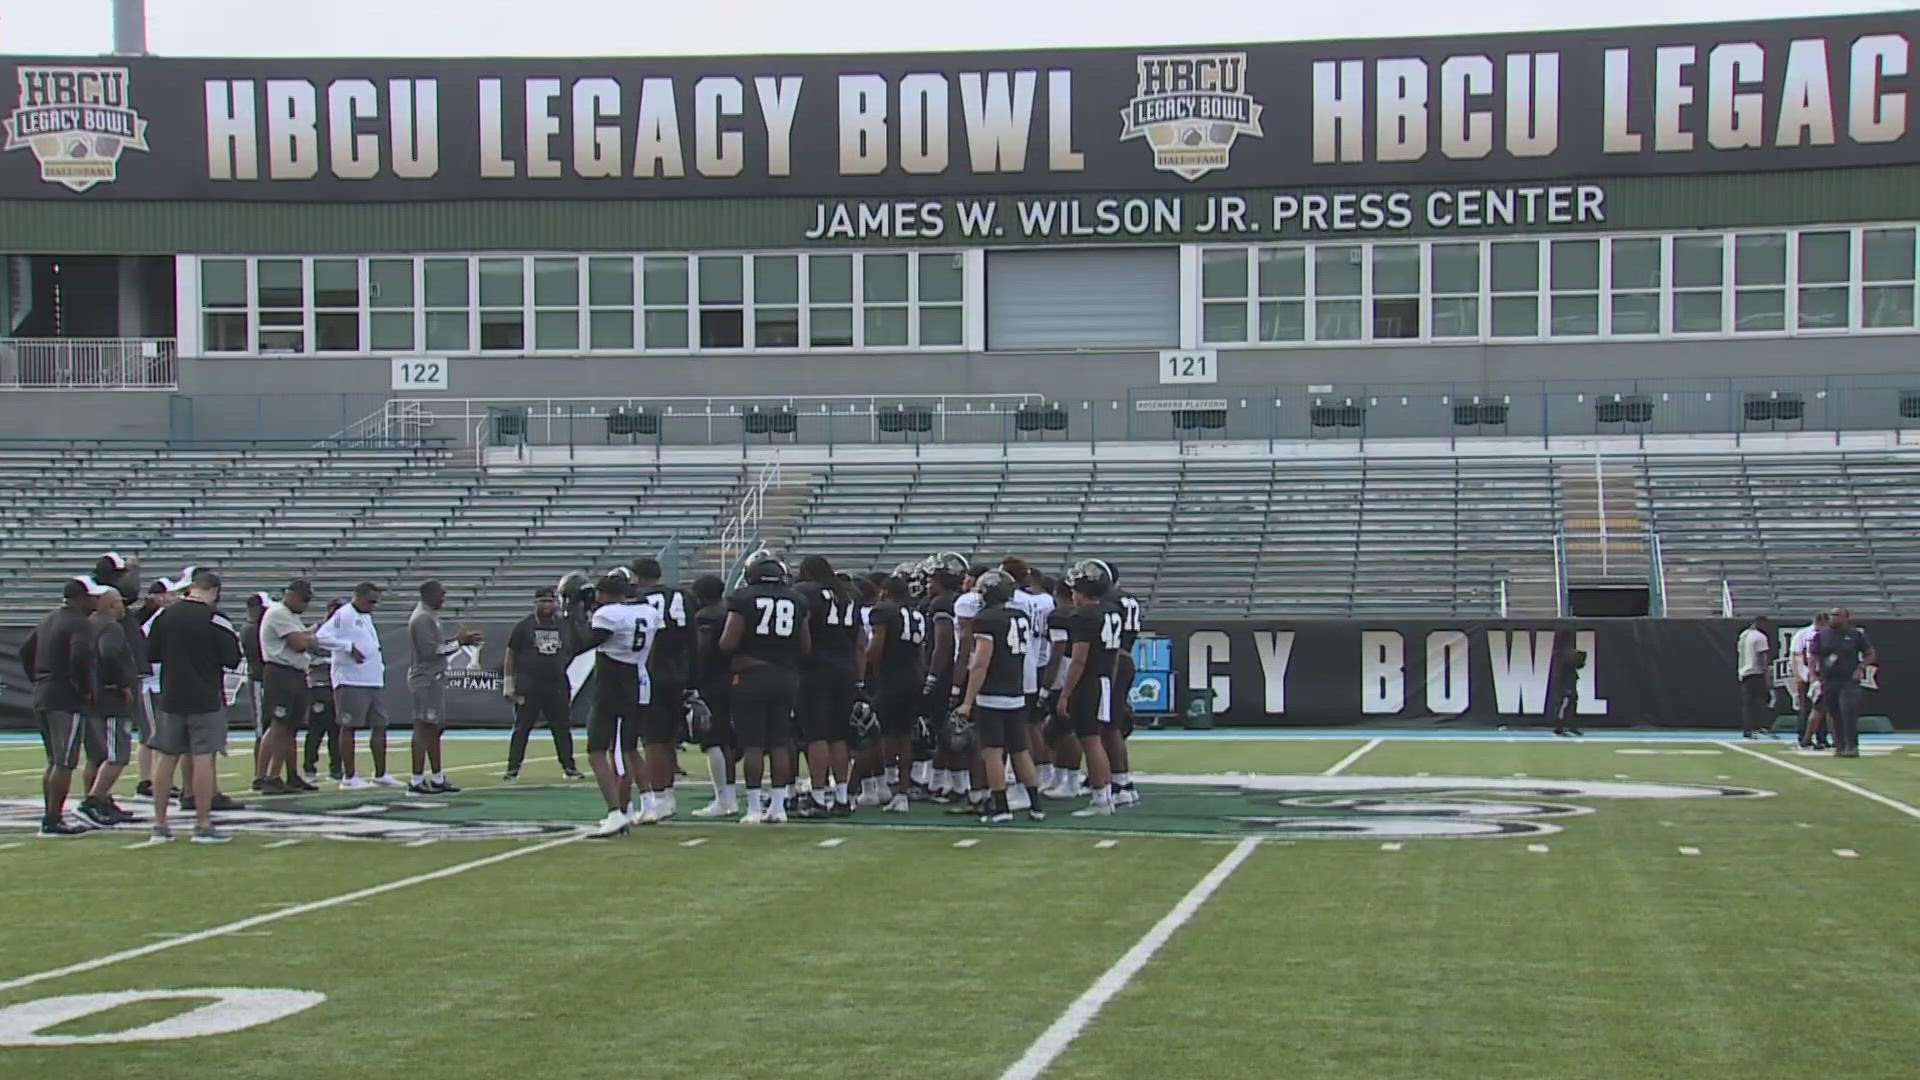 The Legacy Bowl is a post-season all-star game that brings the best players from HBCUs around the country onto one field.